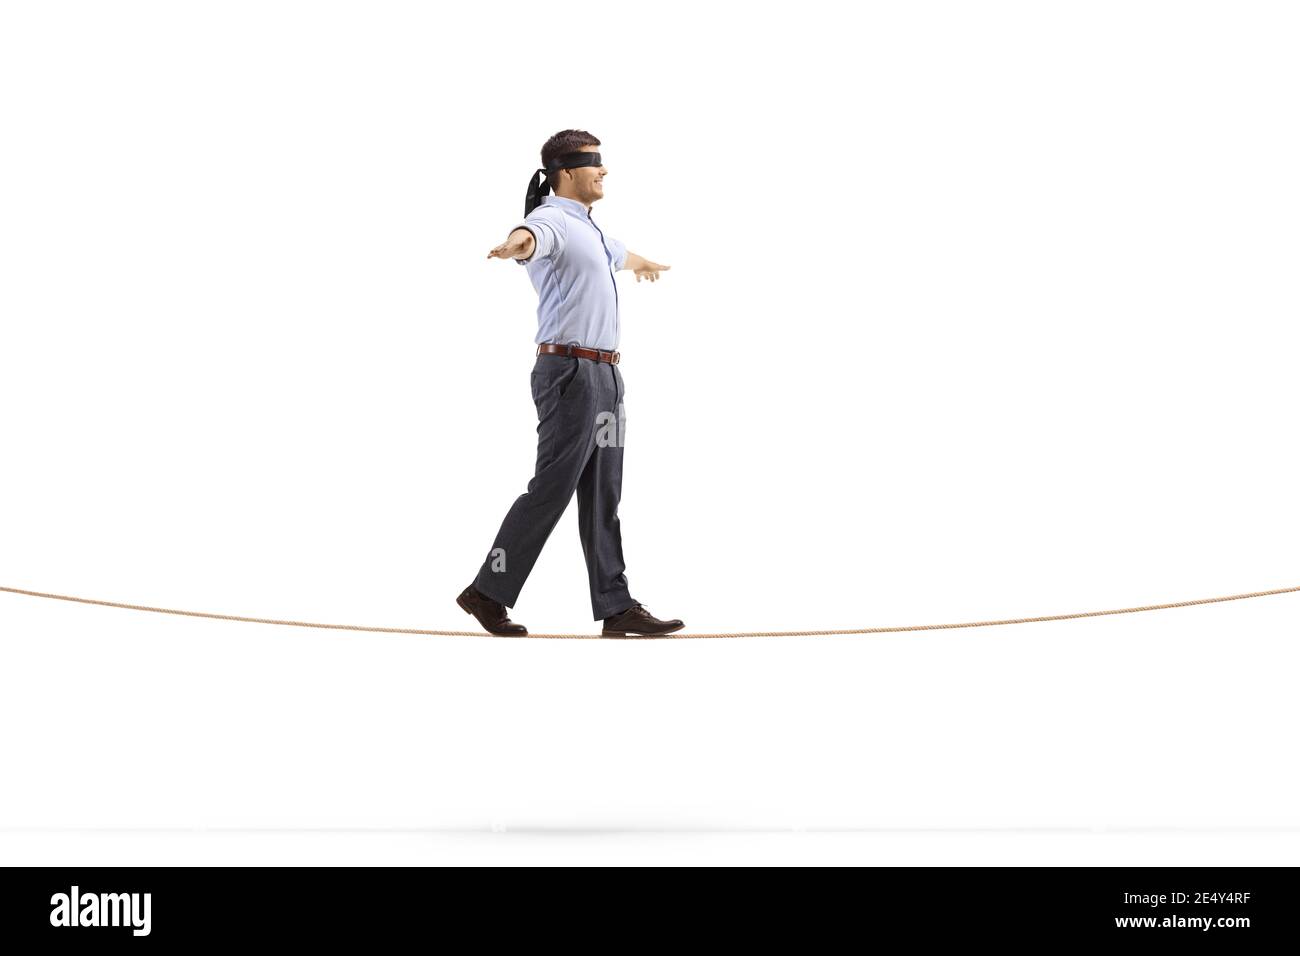 Blindfolded Man Stretching His Arms Out Walking Through Many Question Marks  Stock Photo - Download Image Now - iStock